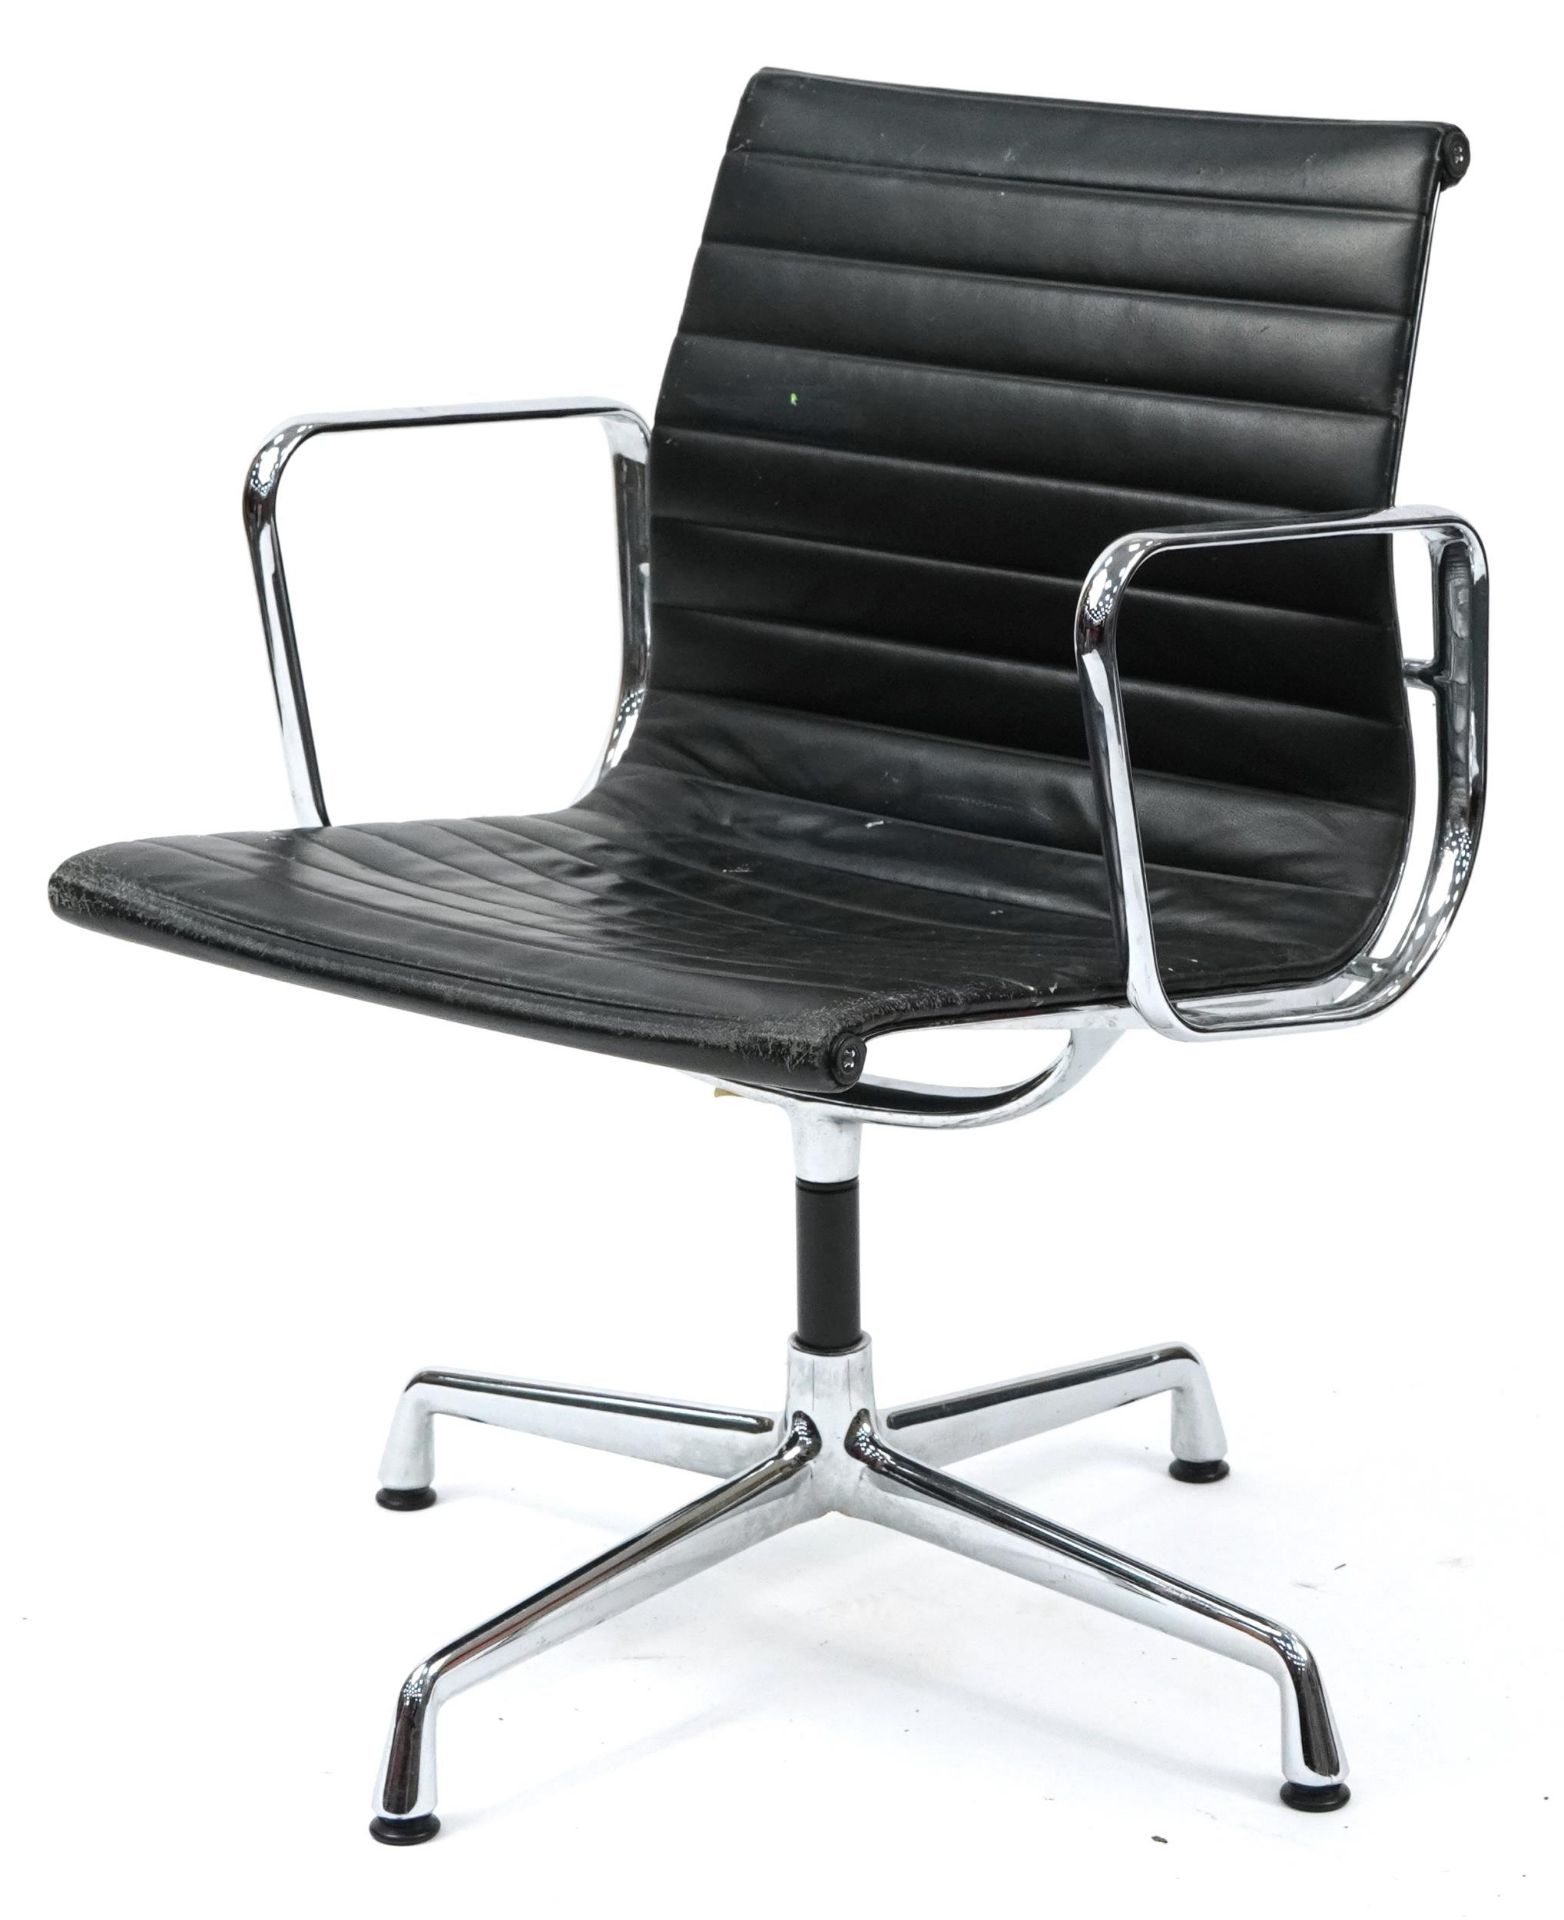 Charles Eames for Vitra, ea 108 swivel chair chair with black leather uphostery, Vitra label to